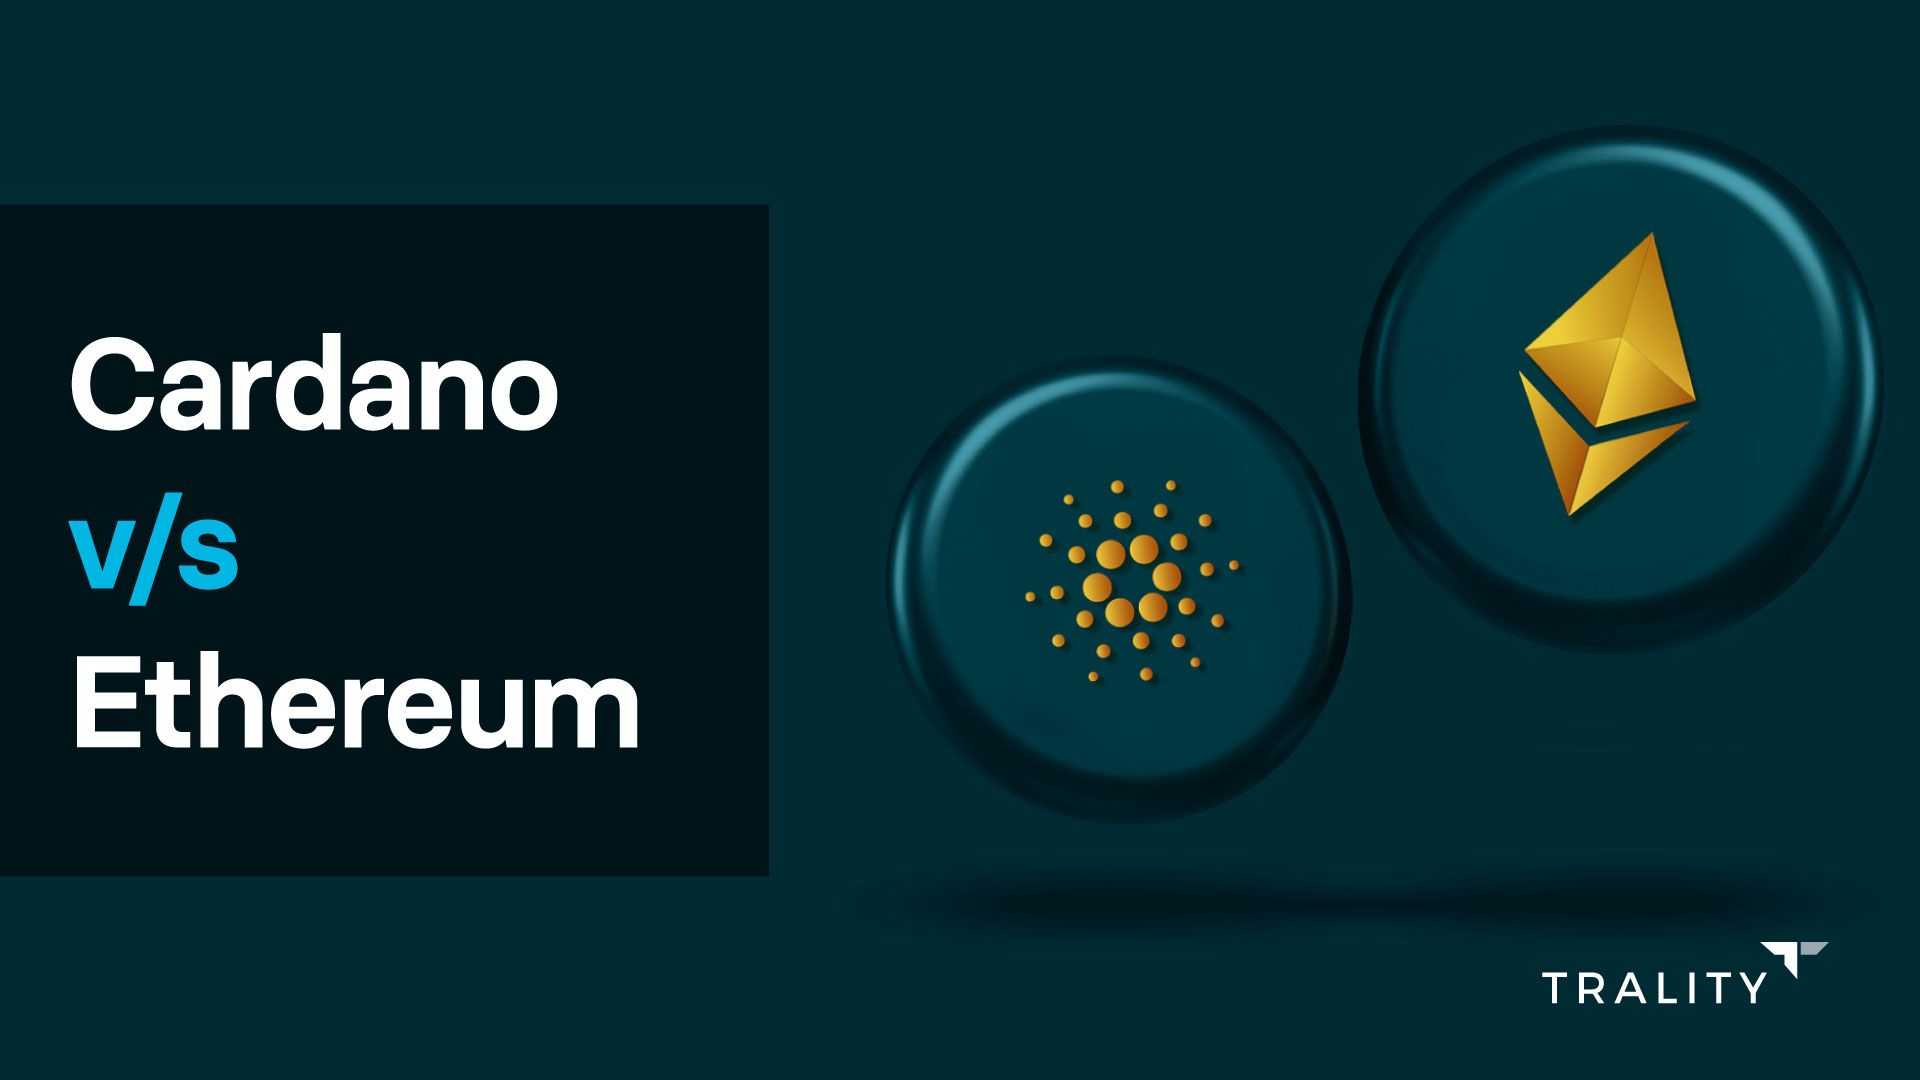 Cardano Vs Ethereum: Which Is Best?